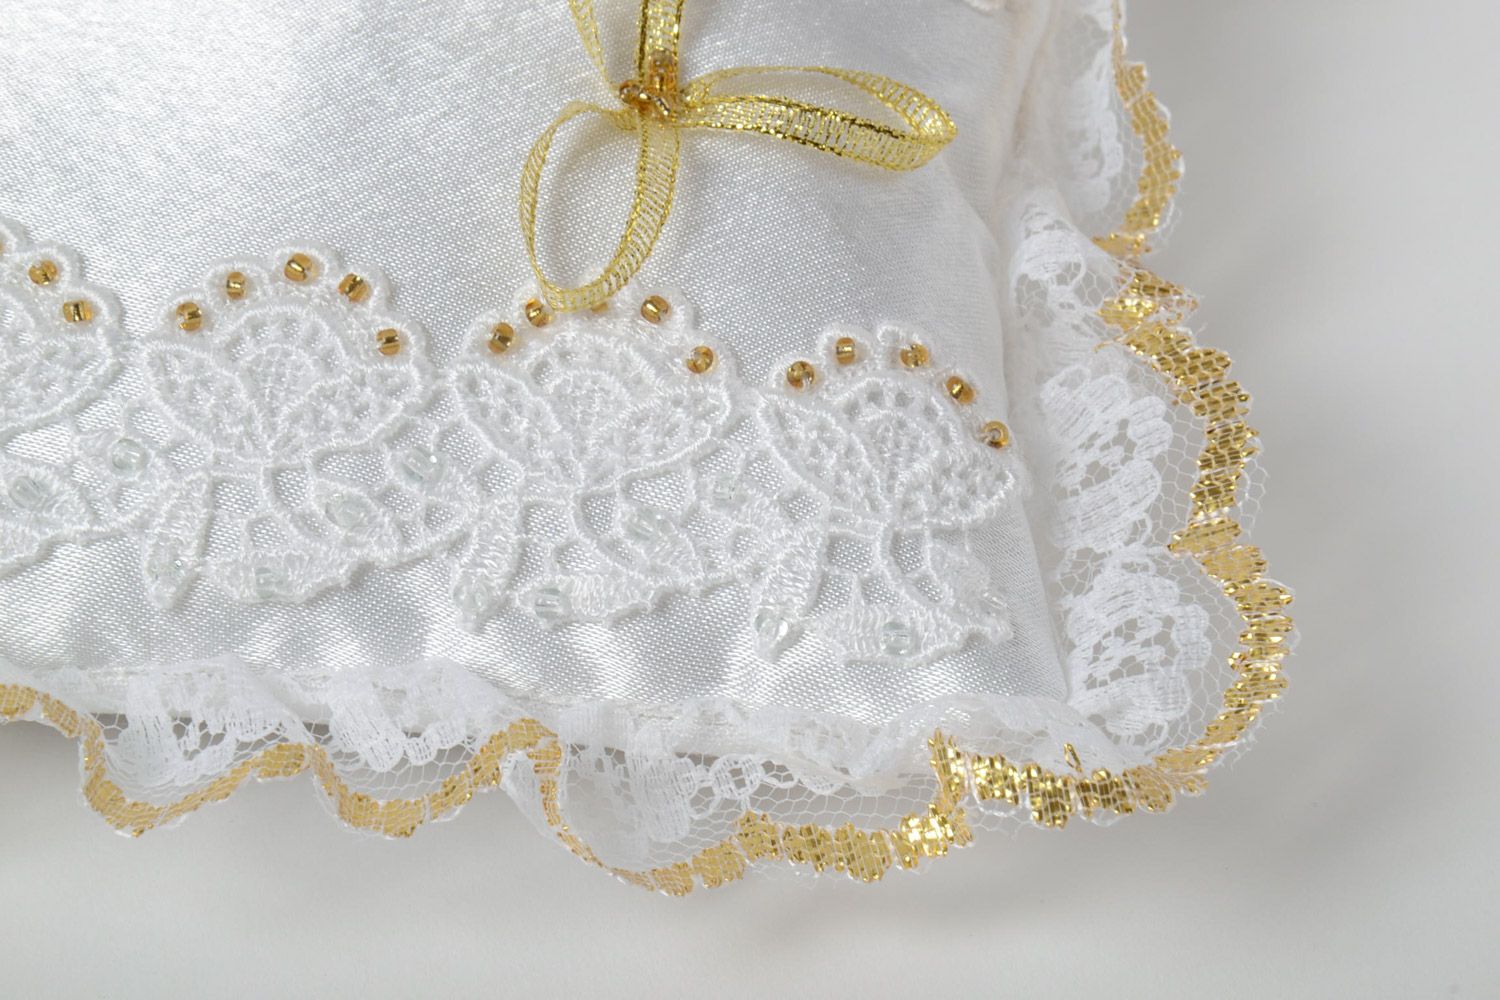 Handmade festive wedding rings pillow sewn of satin with lace and Czech beads photo 3